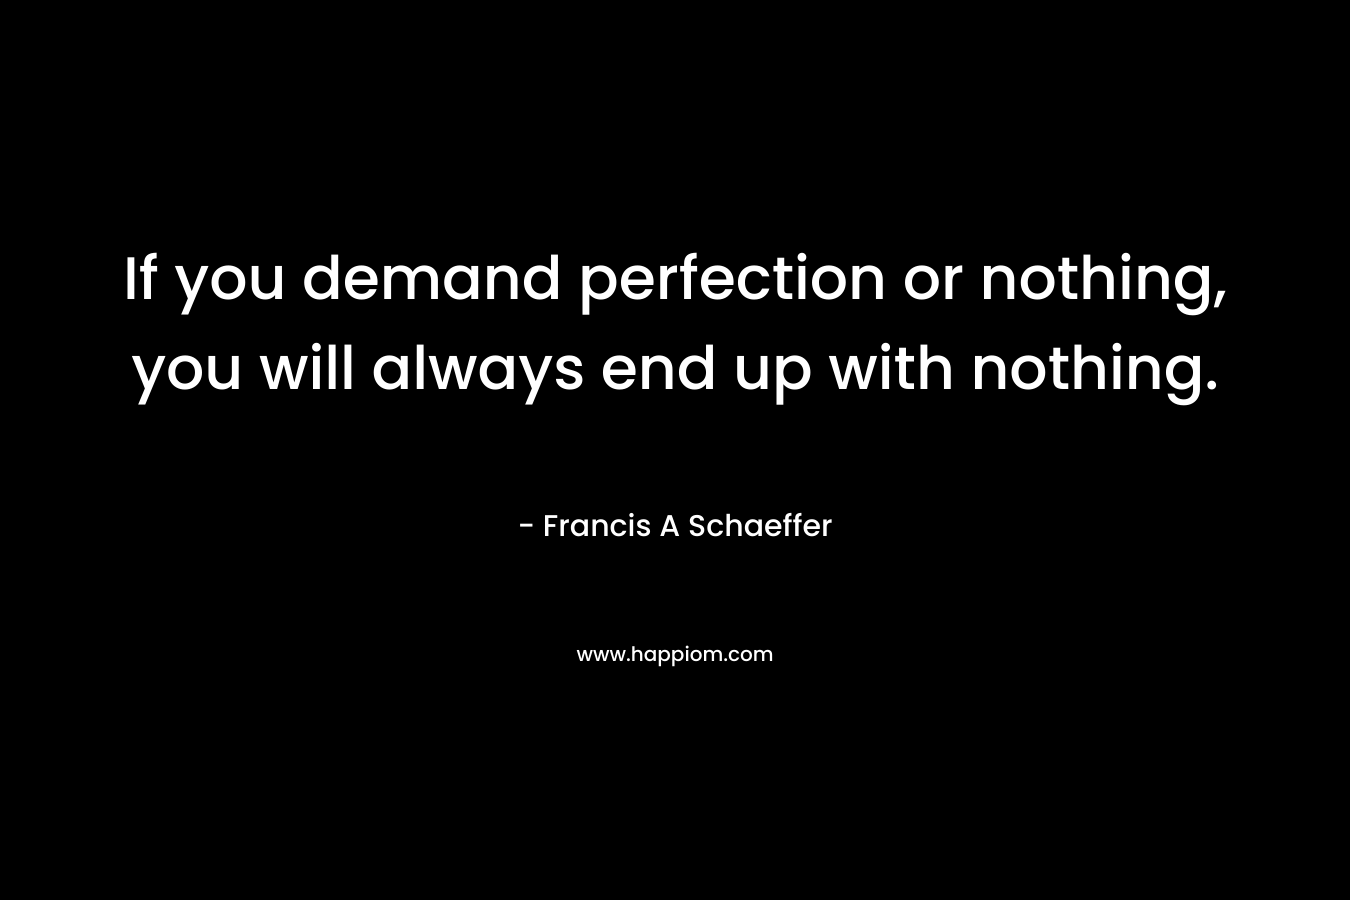 If you demand perfection or nothing, you will always end up with nothing. – Francis A Schaeffer